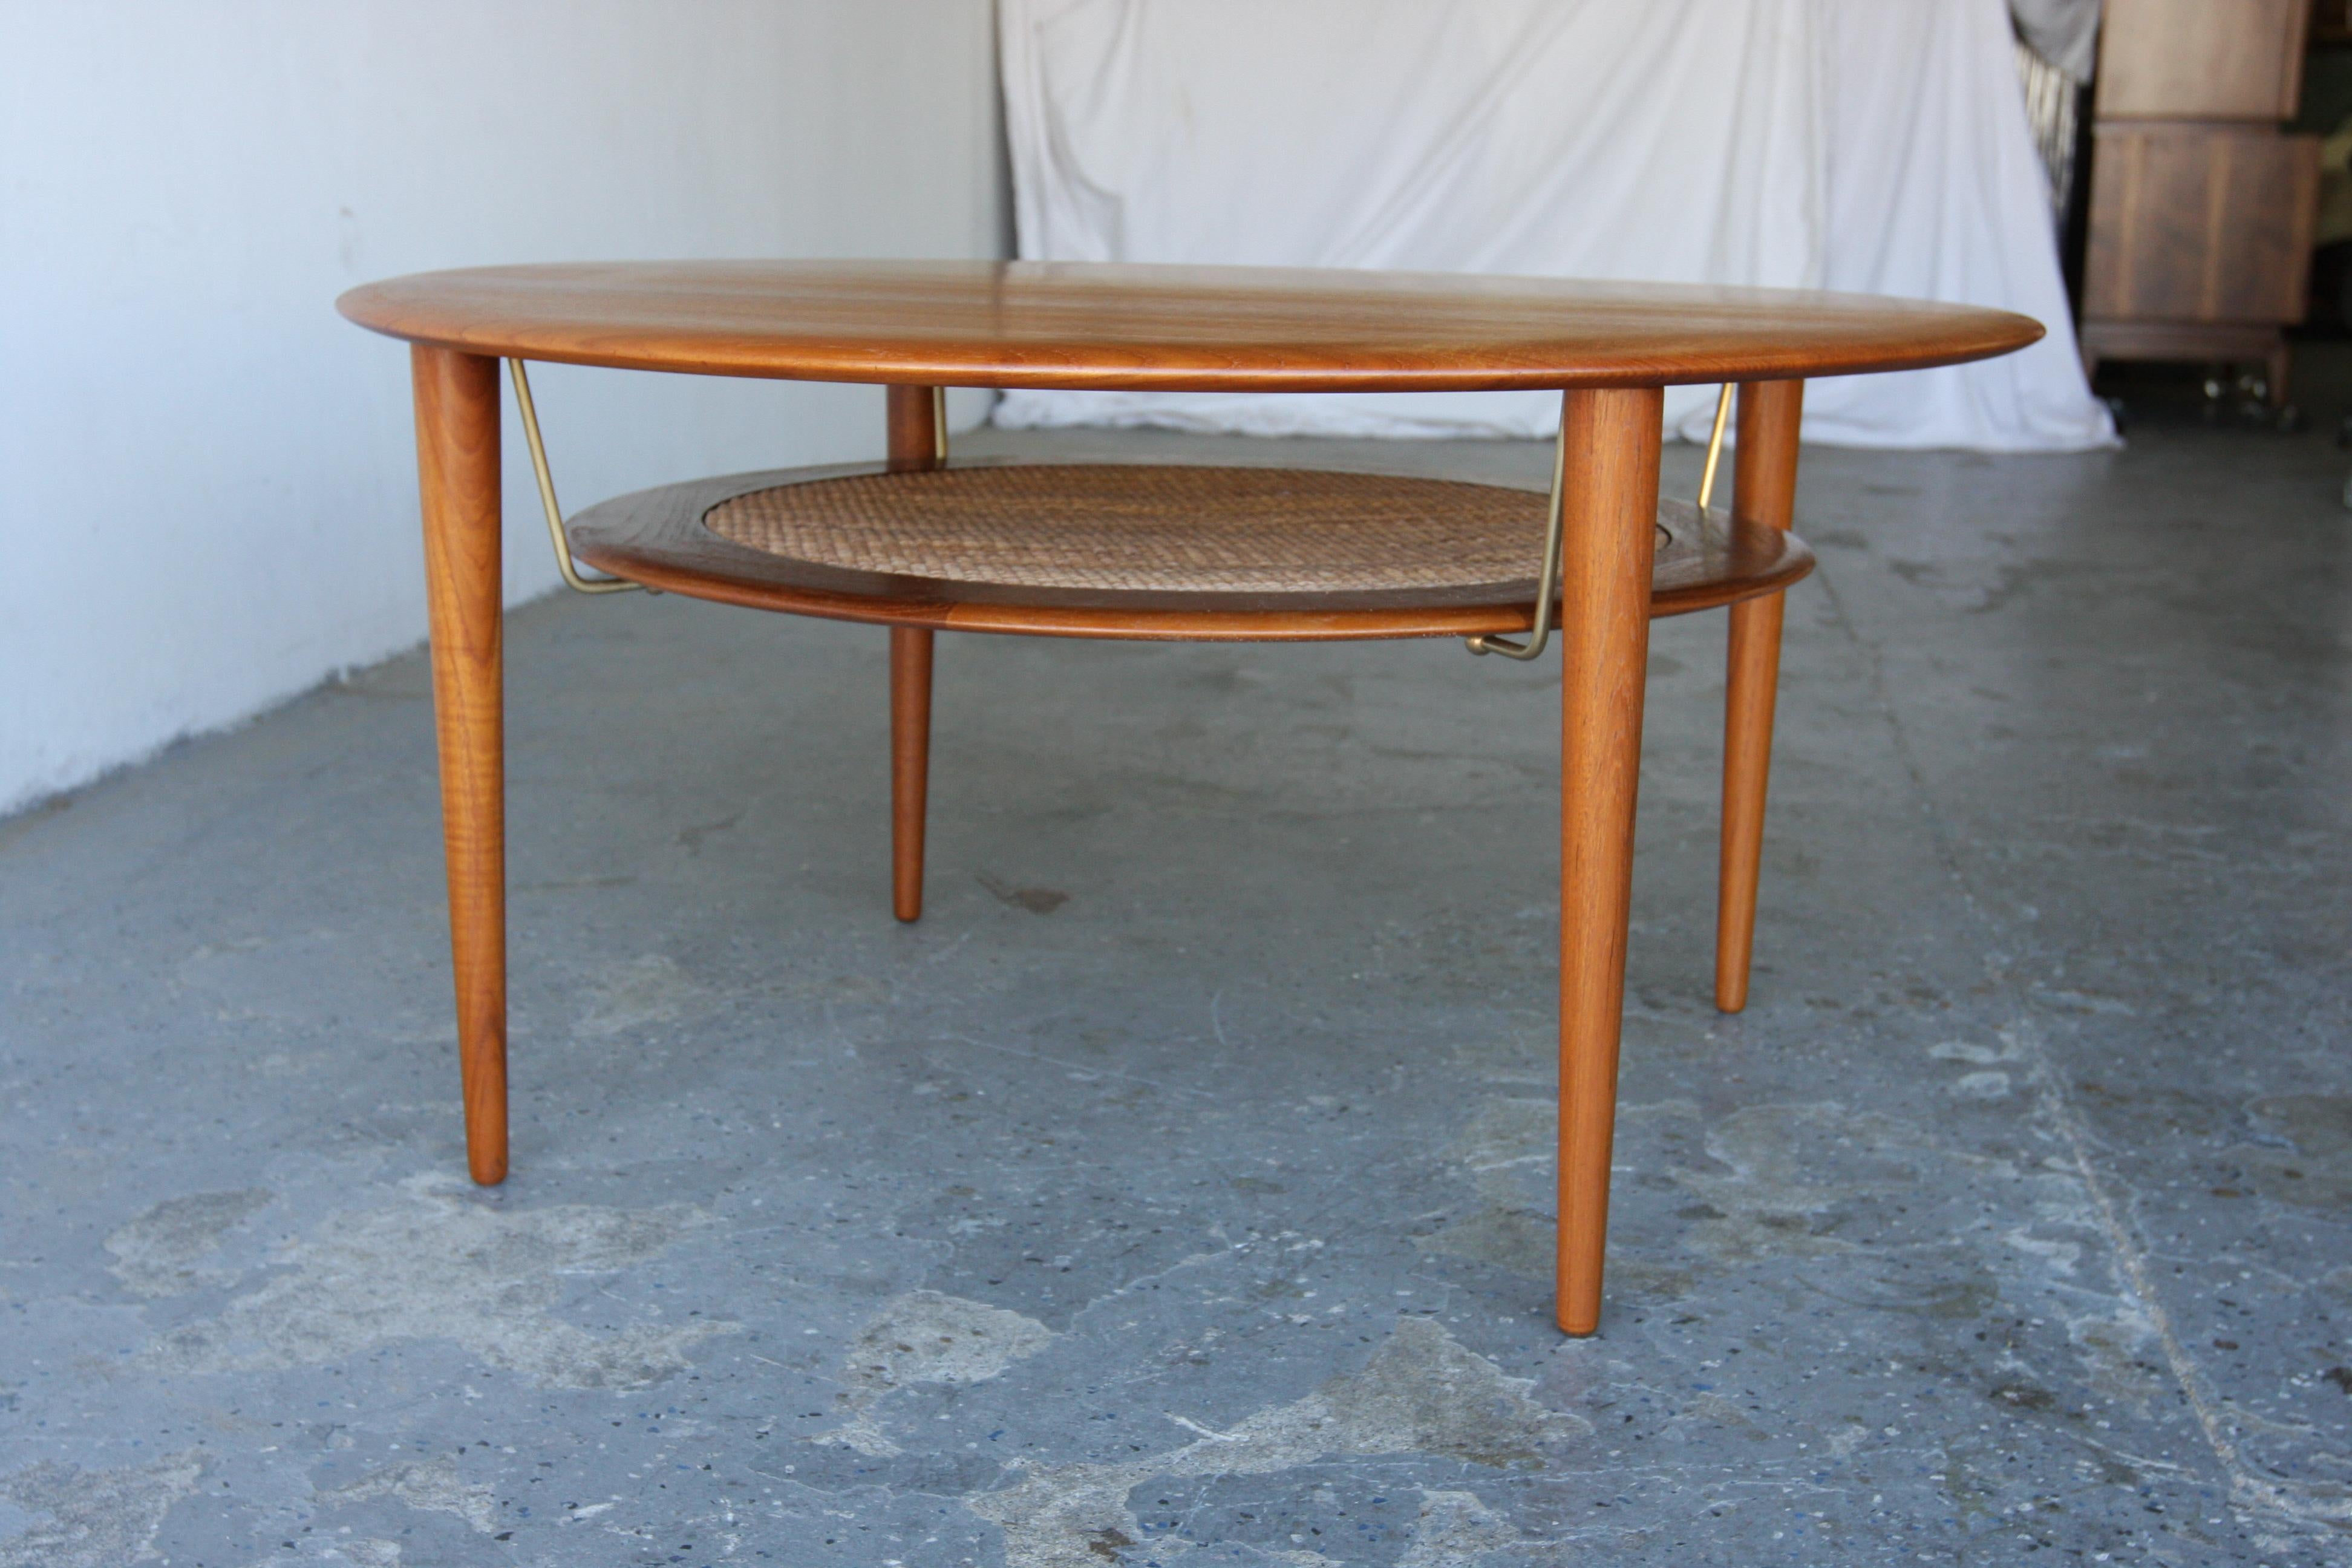 Beautiful round coffee table designed by Peter Hvidt & Orla Molgaard Nielsen and manufactured by France & Son, Denmark 1960s. The table is made of solid teak ( that is quite rare most coffee tables are veneer tops)r.

Danish Modern two-tiered coffee